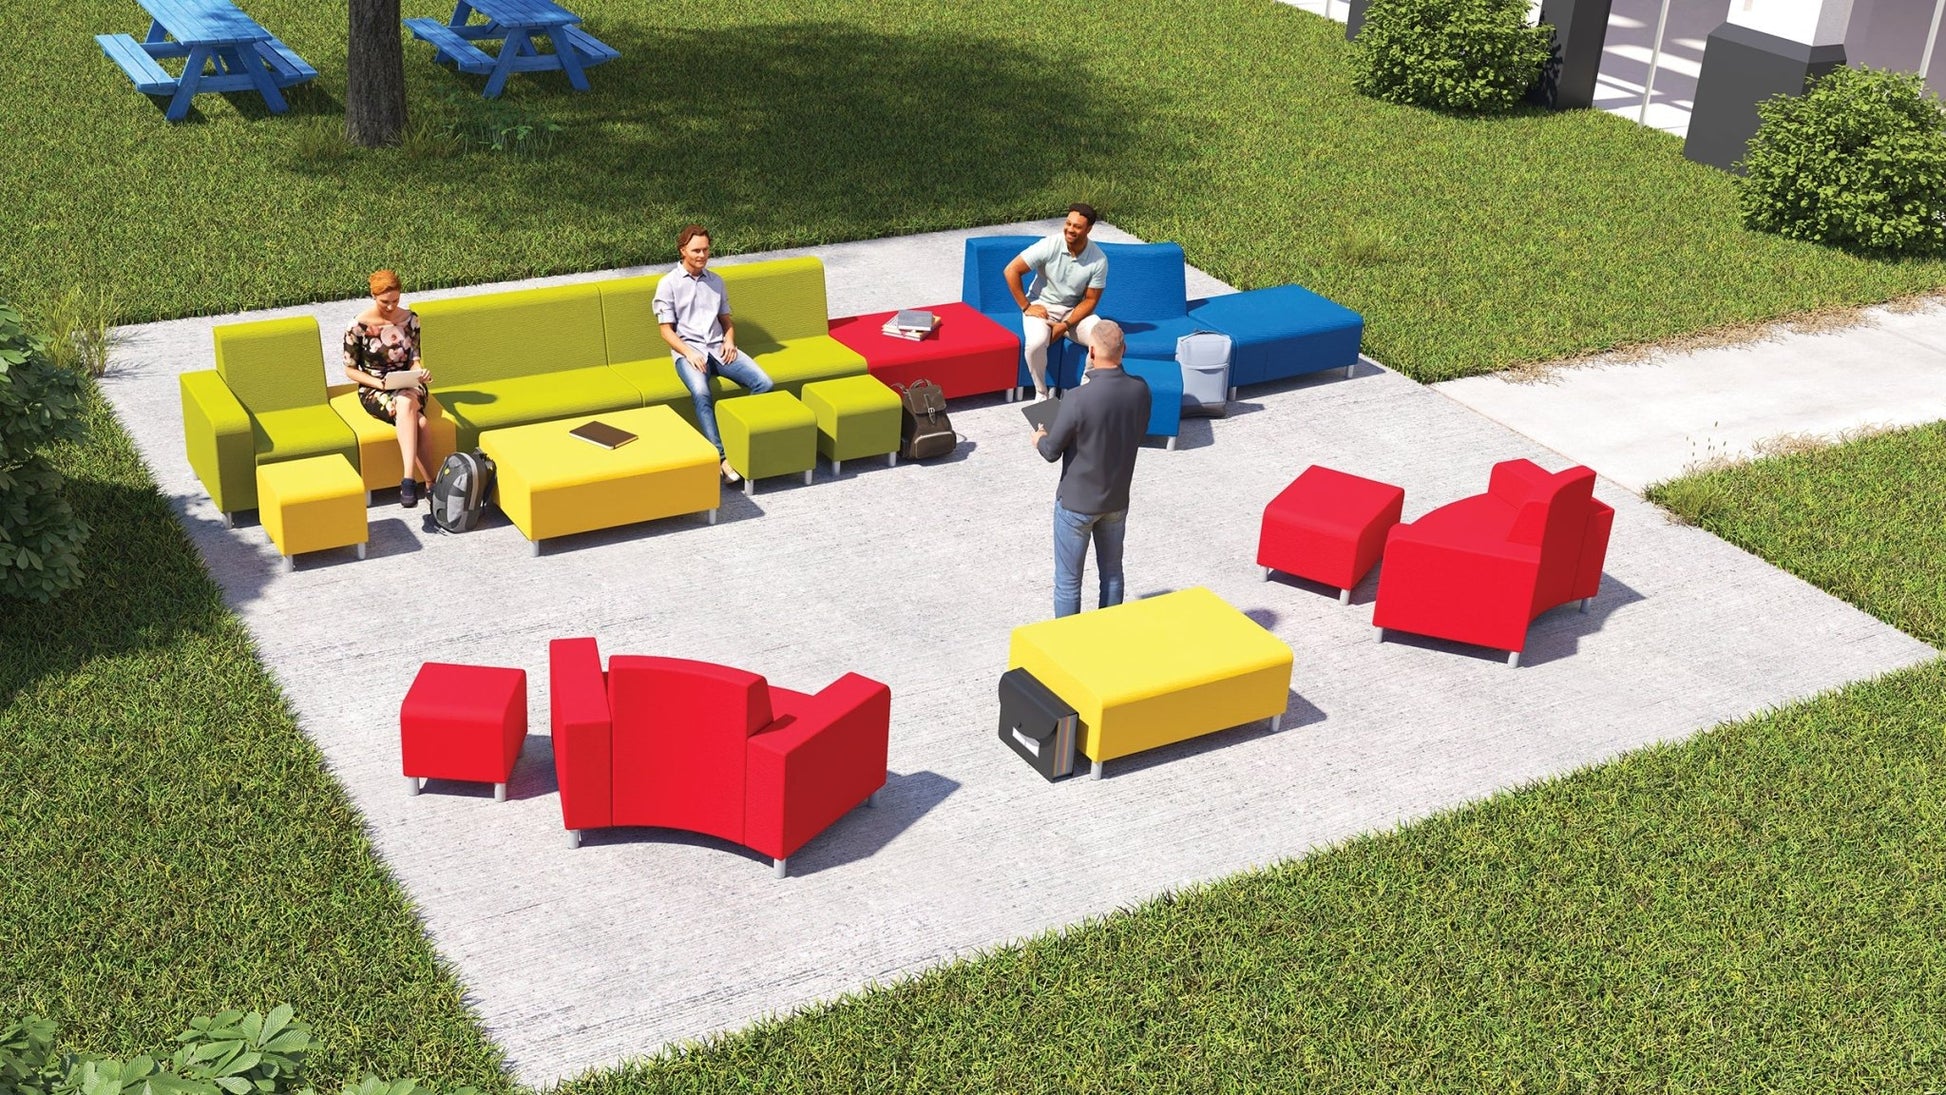 Mooreco Phoeby Outdoor Soft Seating - Outside Curve Loveseat Chair Left Arm - 18" Seat Height (PBA4L1L) - SchoolOutlet